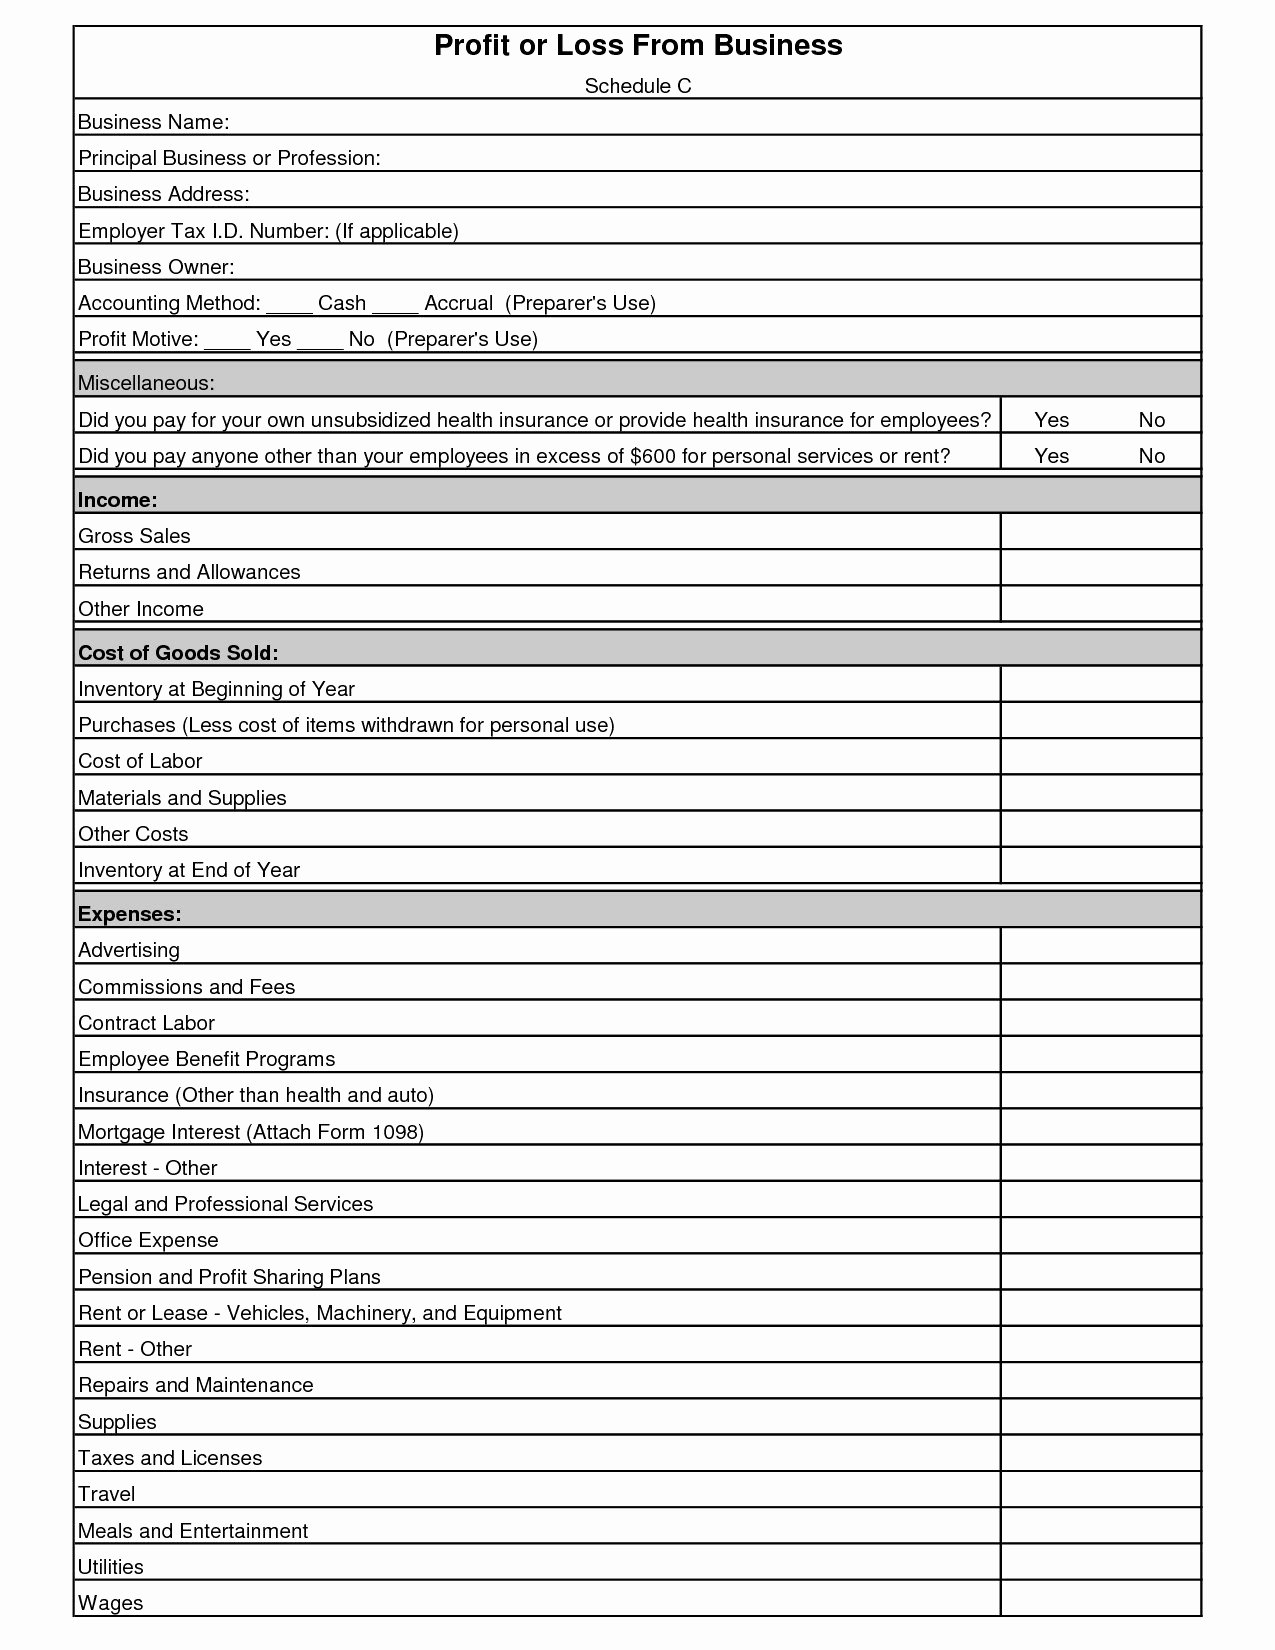 Excel Payroll Template 2019 Lovely Payroll Accrual Spreadsheet 1 Printable Spreadshee Payroll